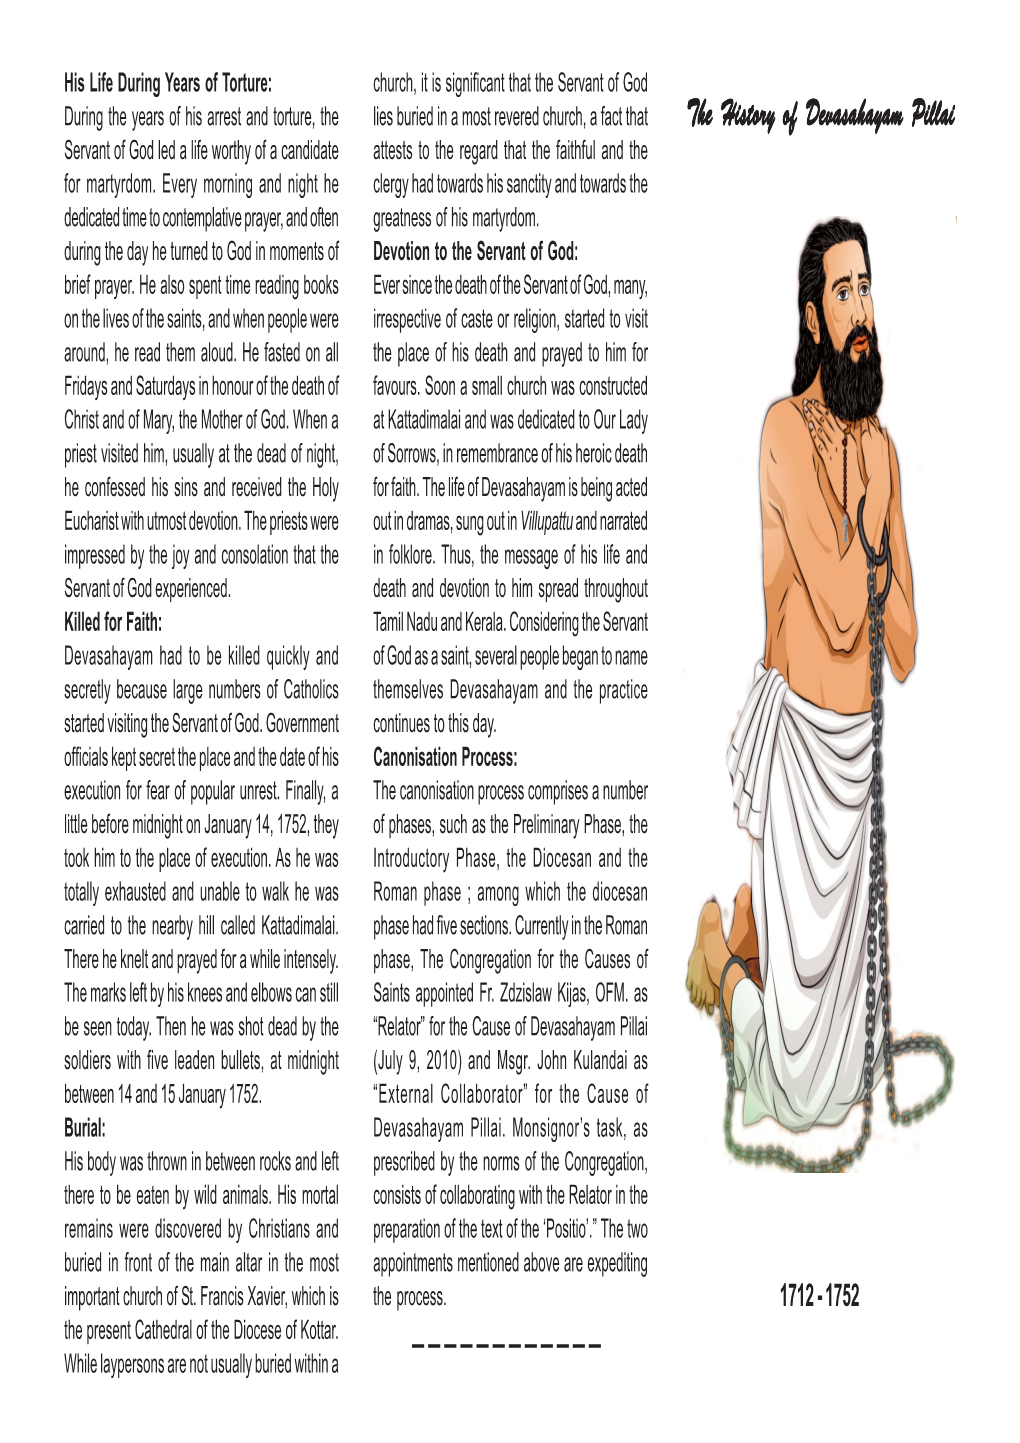 The History of Devasahayam Pillai Servant of God Led a Life Worthy of a Candidate Attests to the Regard That the Faithful and the for Martyrdom